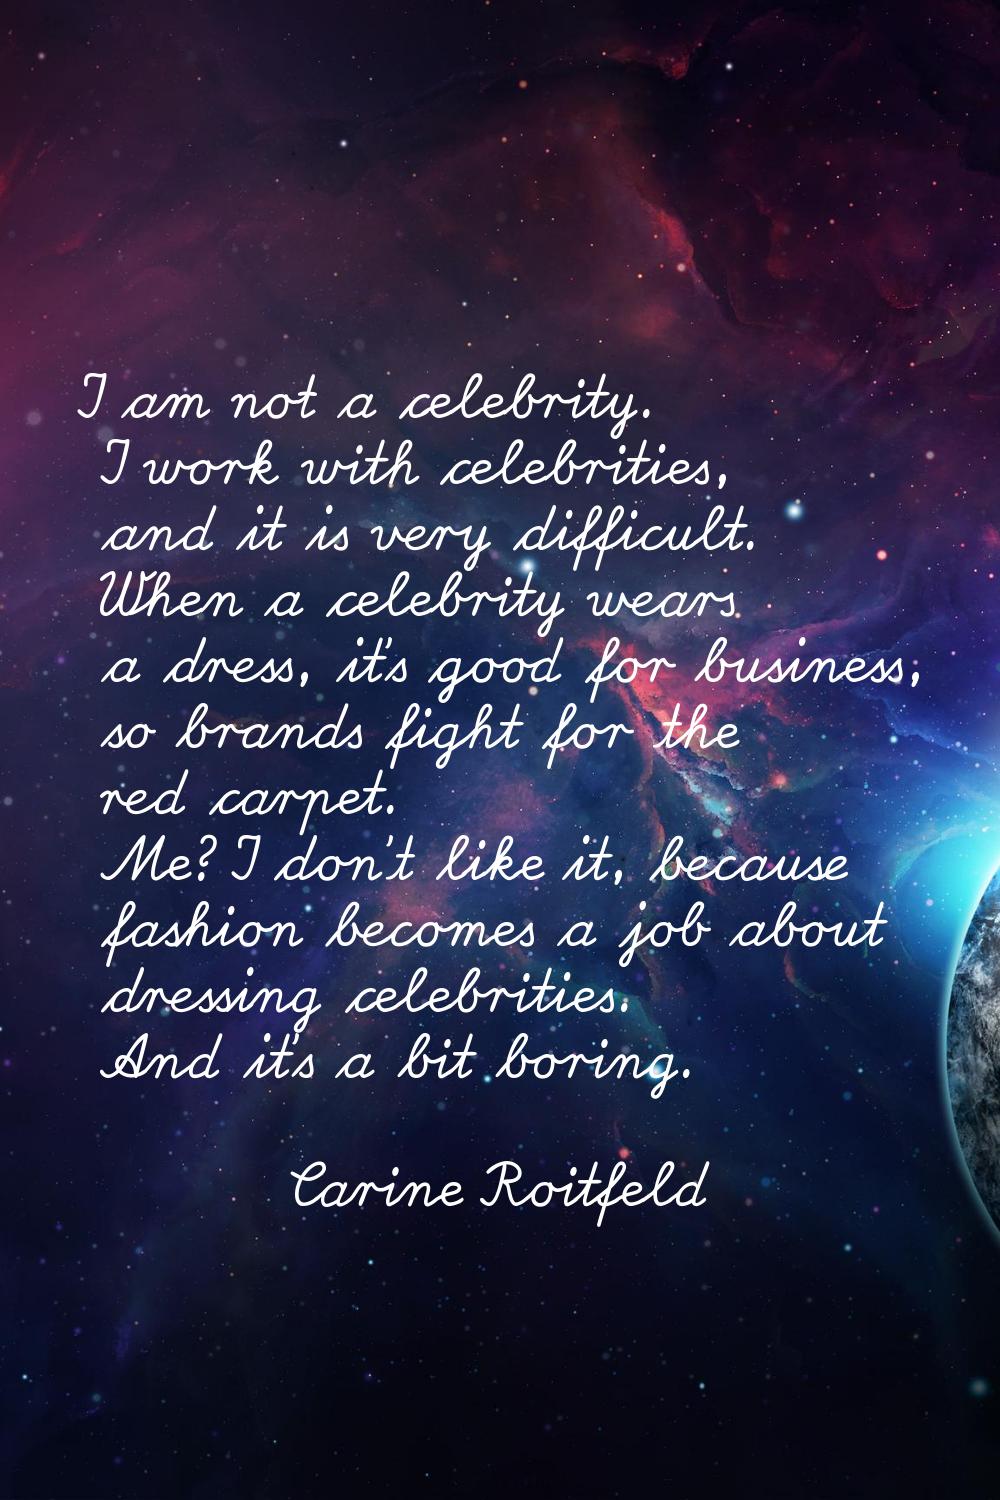 I am not a celebrity. I work with celebrities, and it is very difficult. When a celebrity wears a d